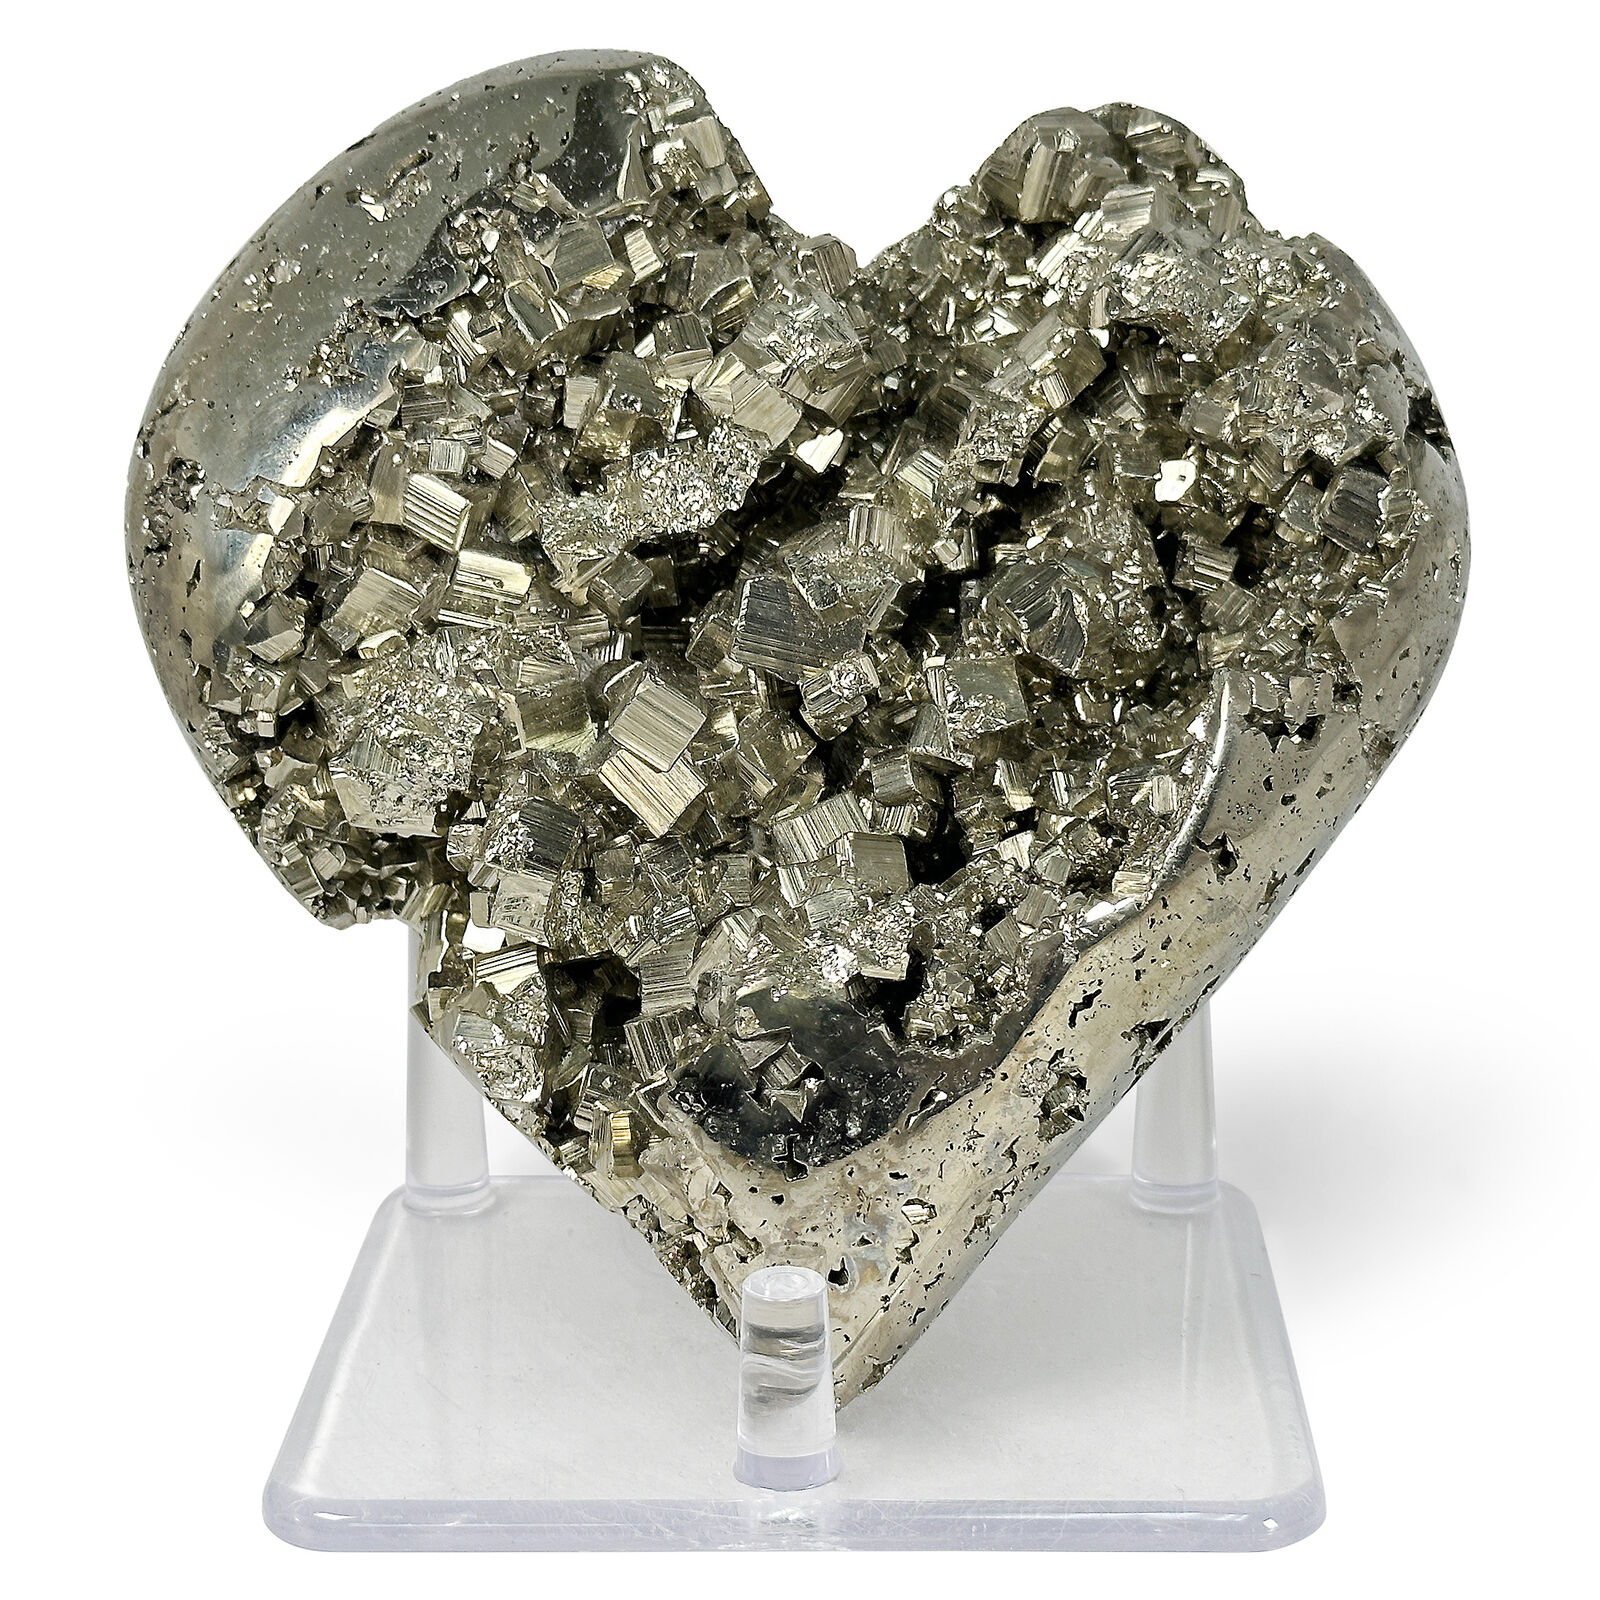 Hand Carved Heart Shaped Pyrite Gemstone 5.2 Lb #RSH227